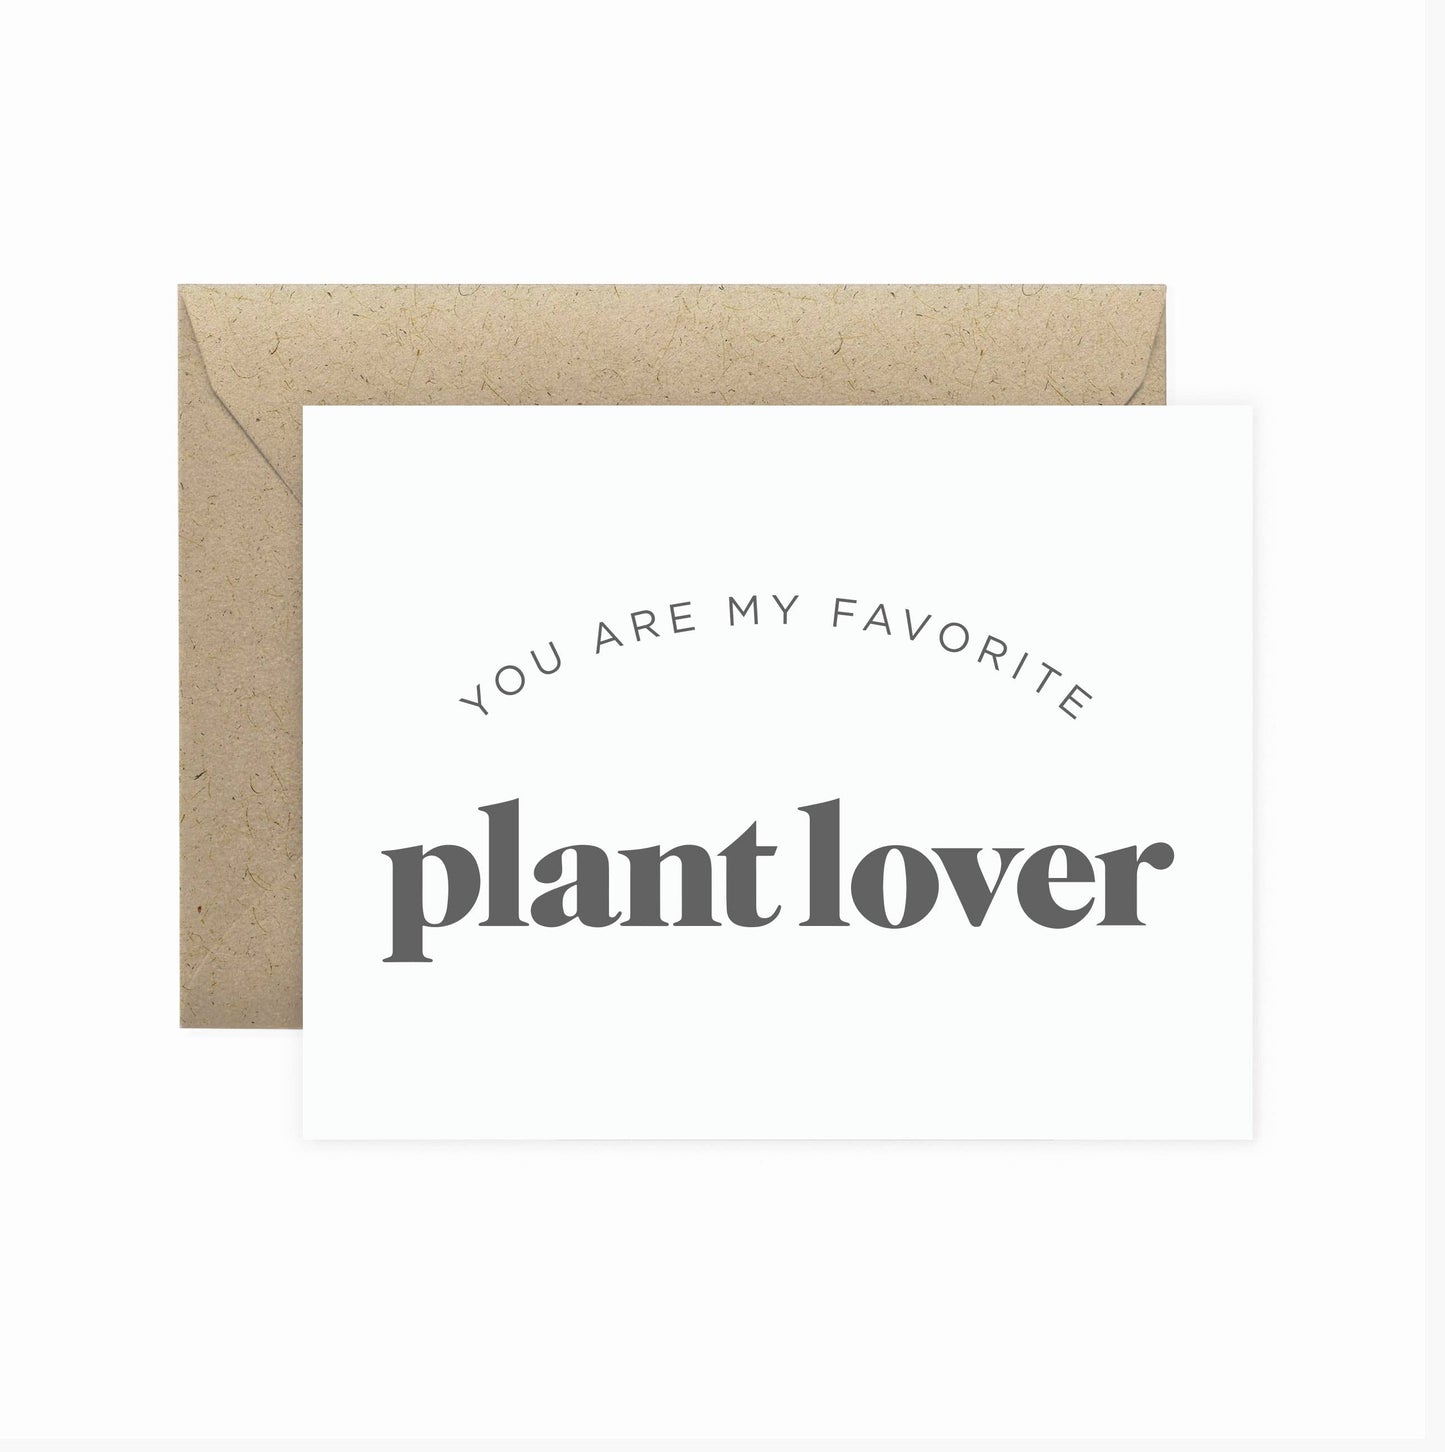 My Favorite Plant Lover Greeting Card